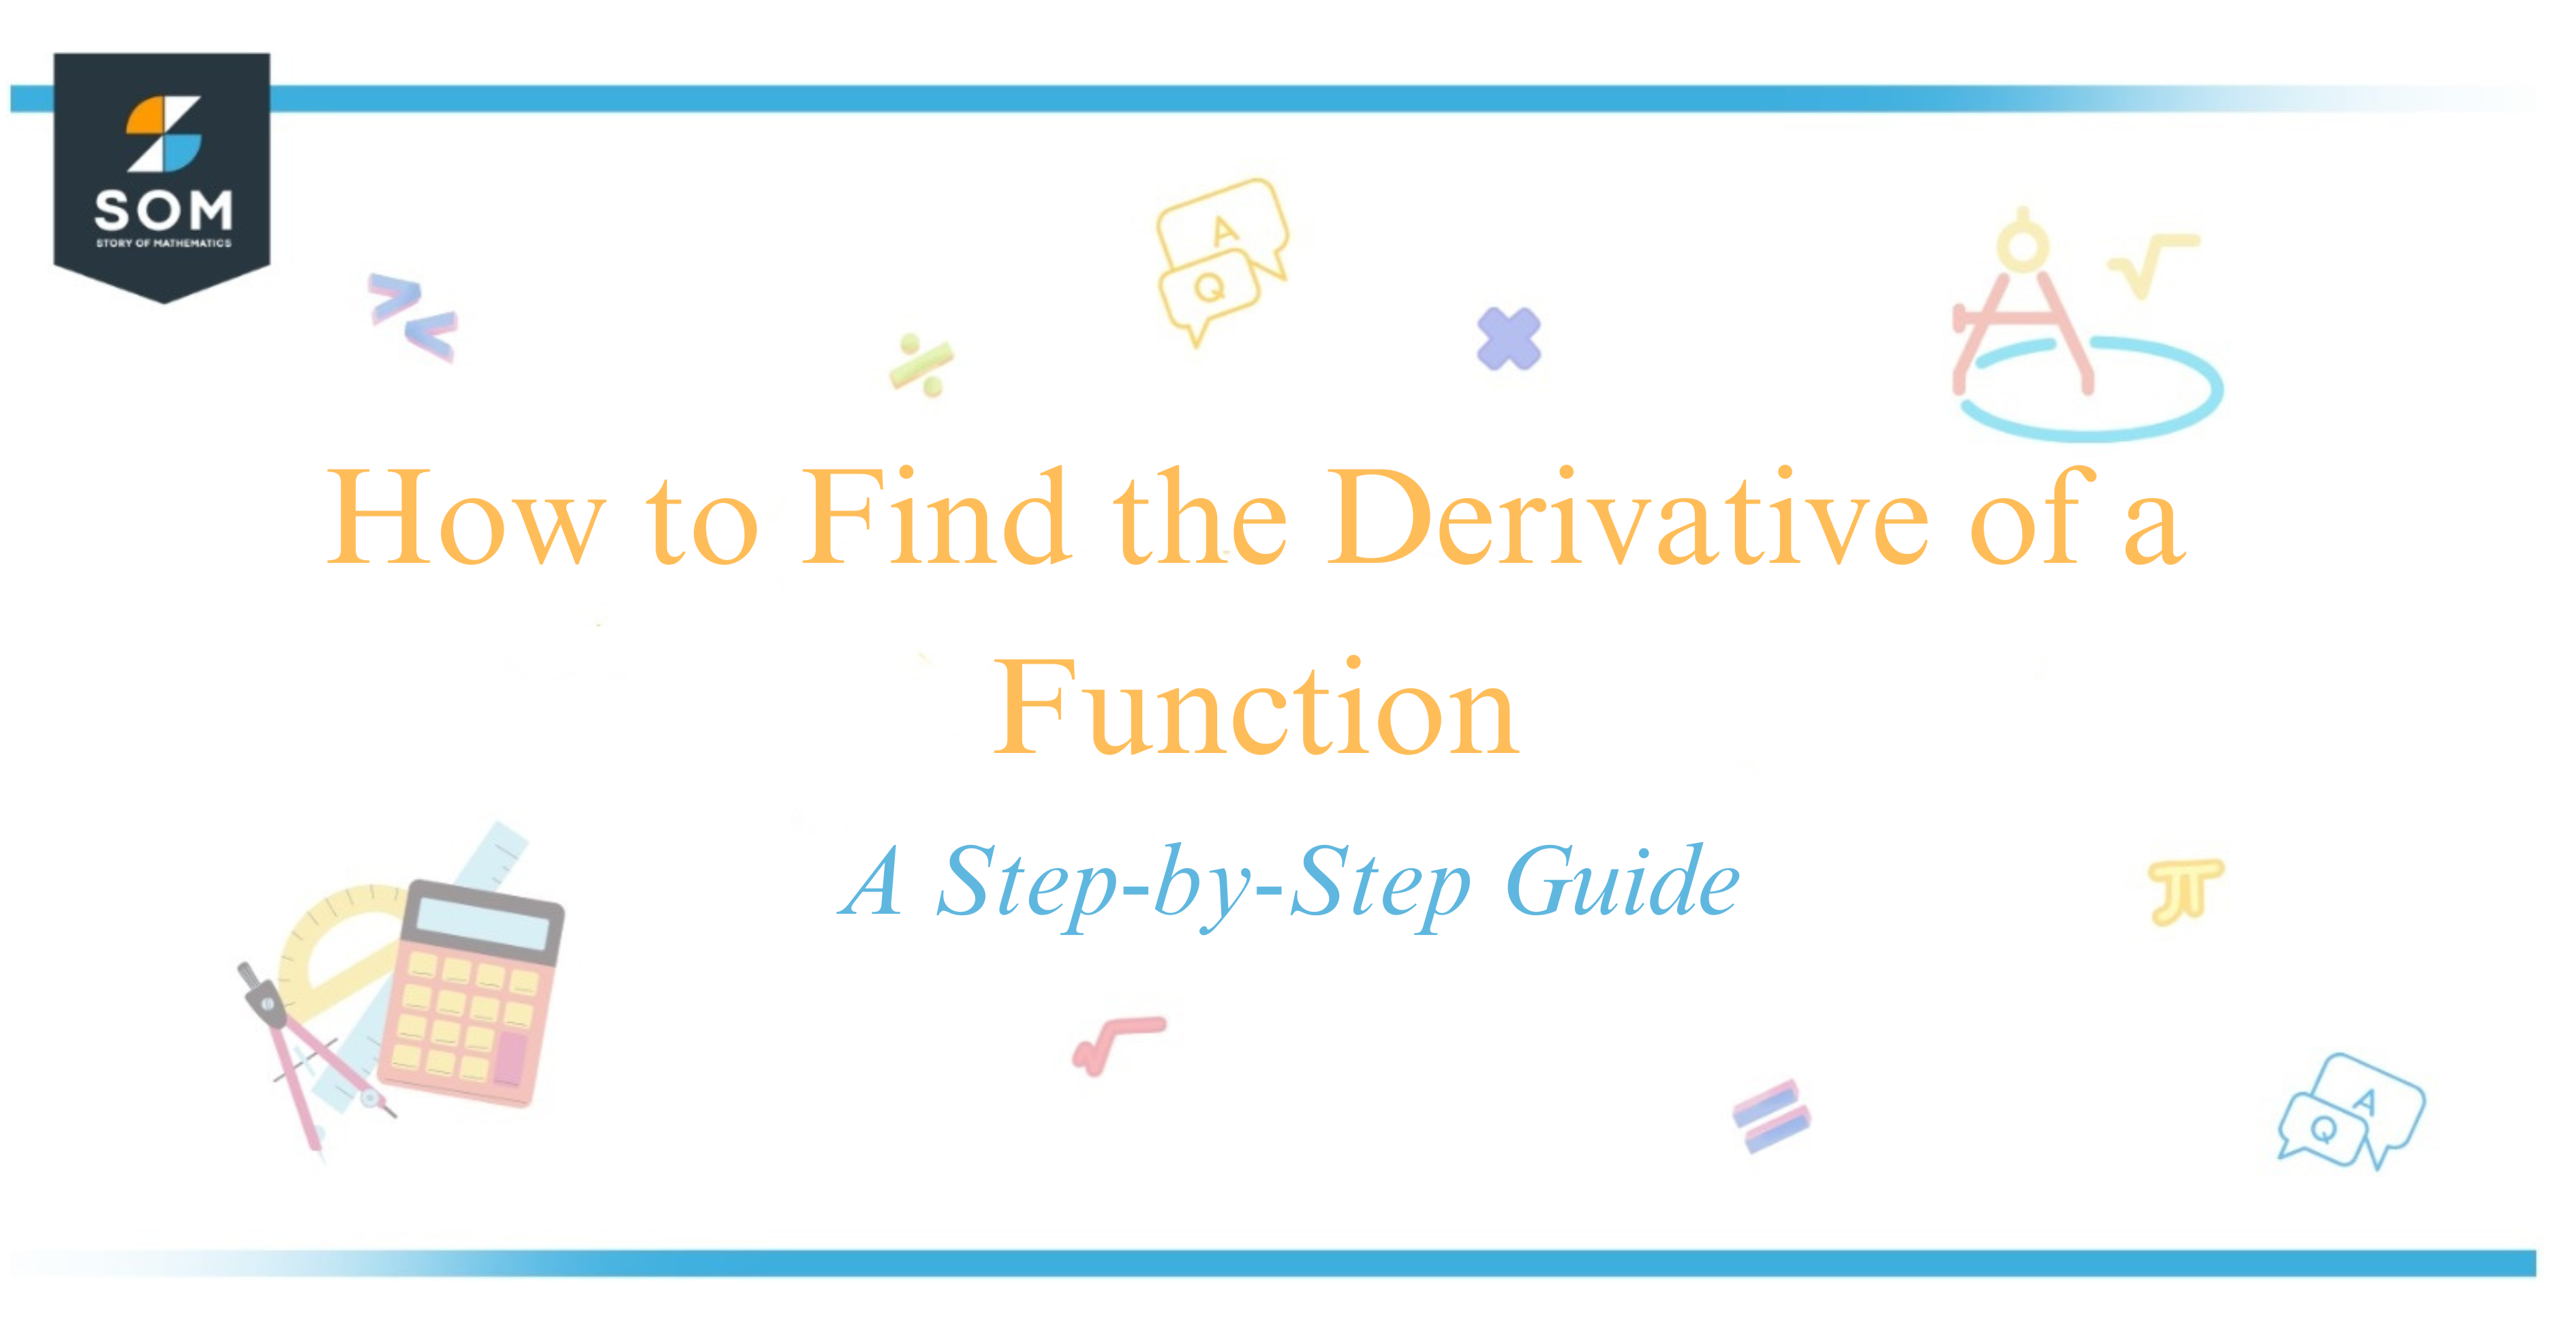 How to Find the Derivative of a Function A Step-by-Step Guide